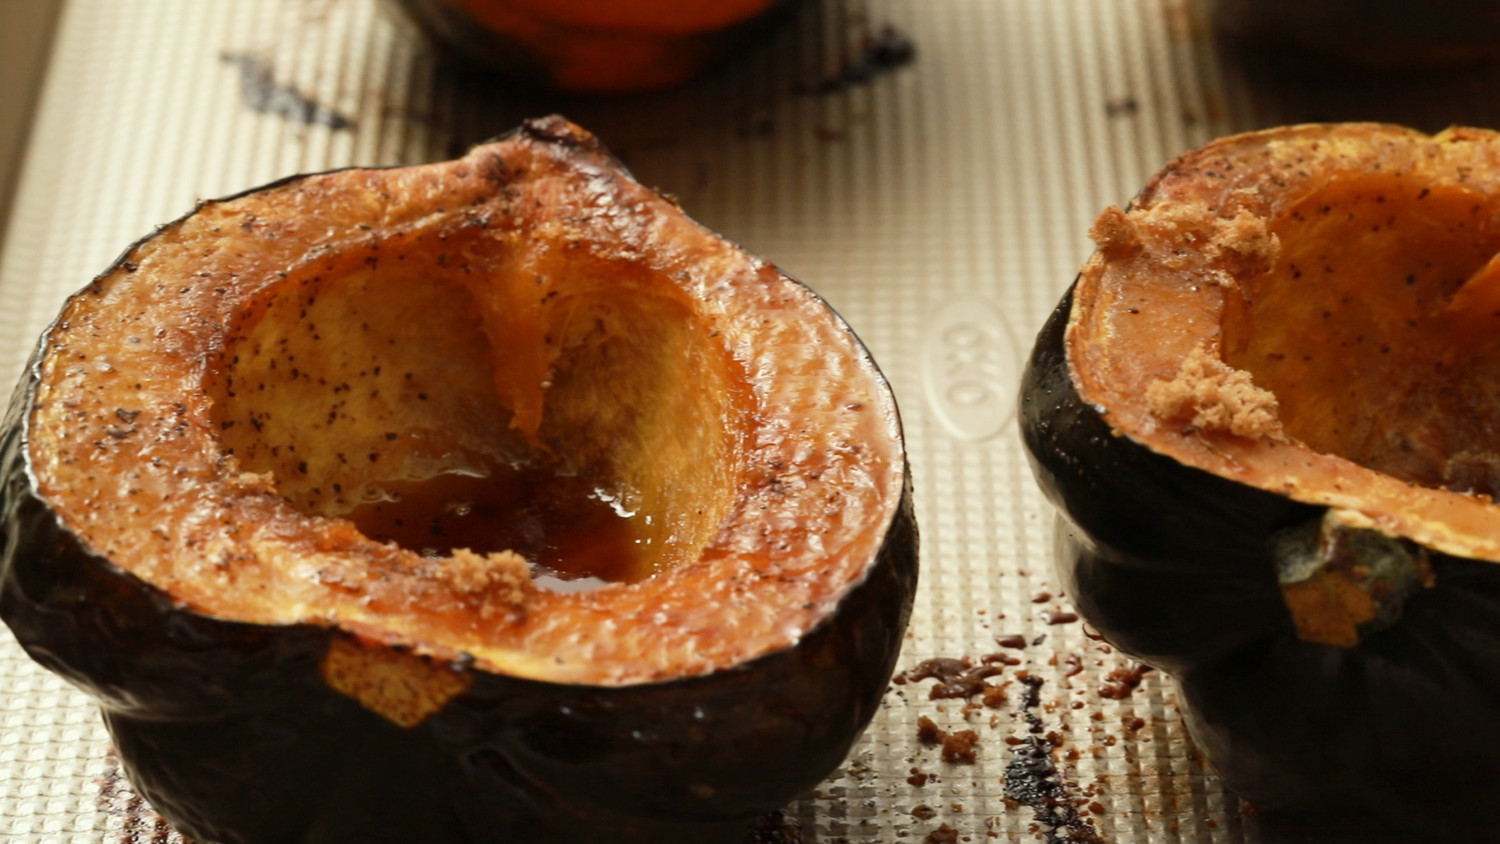 baked acorn squash slices with brown sugar and pecans